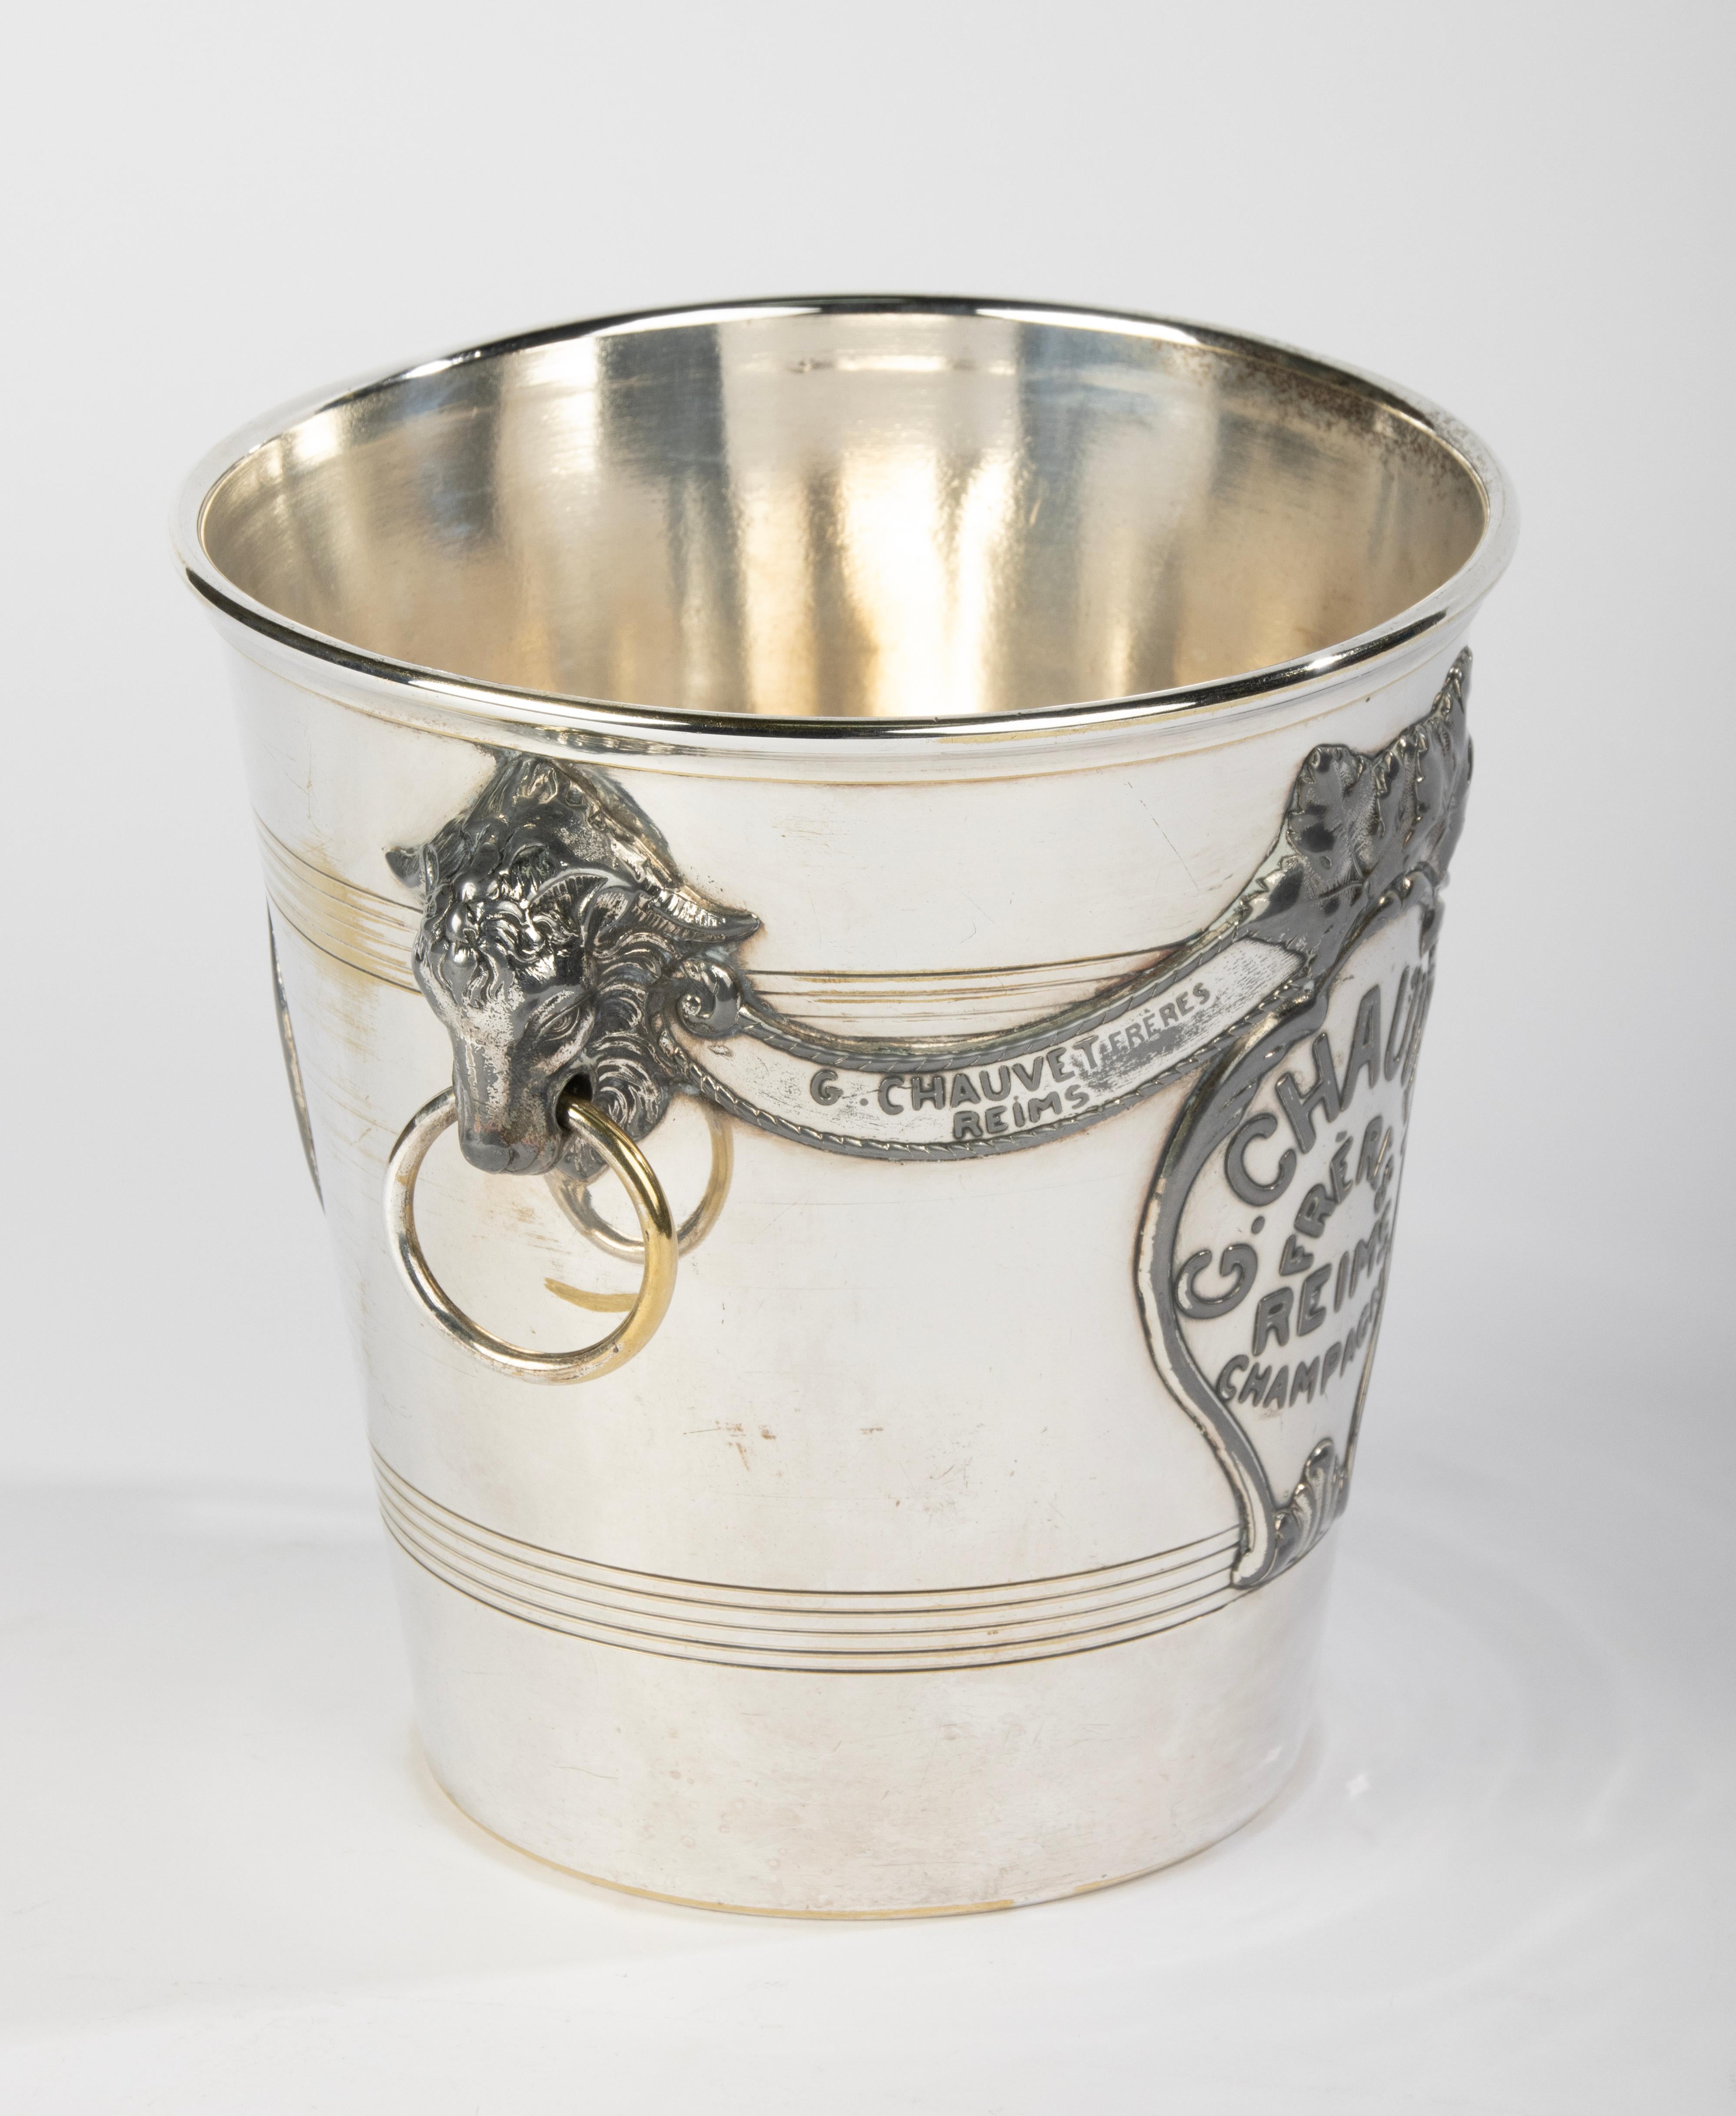 Early 20th Century Antique Silver-Plated Champagne Cooler - Agit Paris for Maison G. Chauvet Reims For Sale